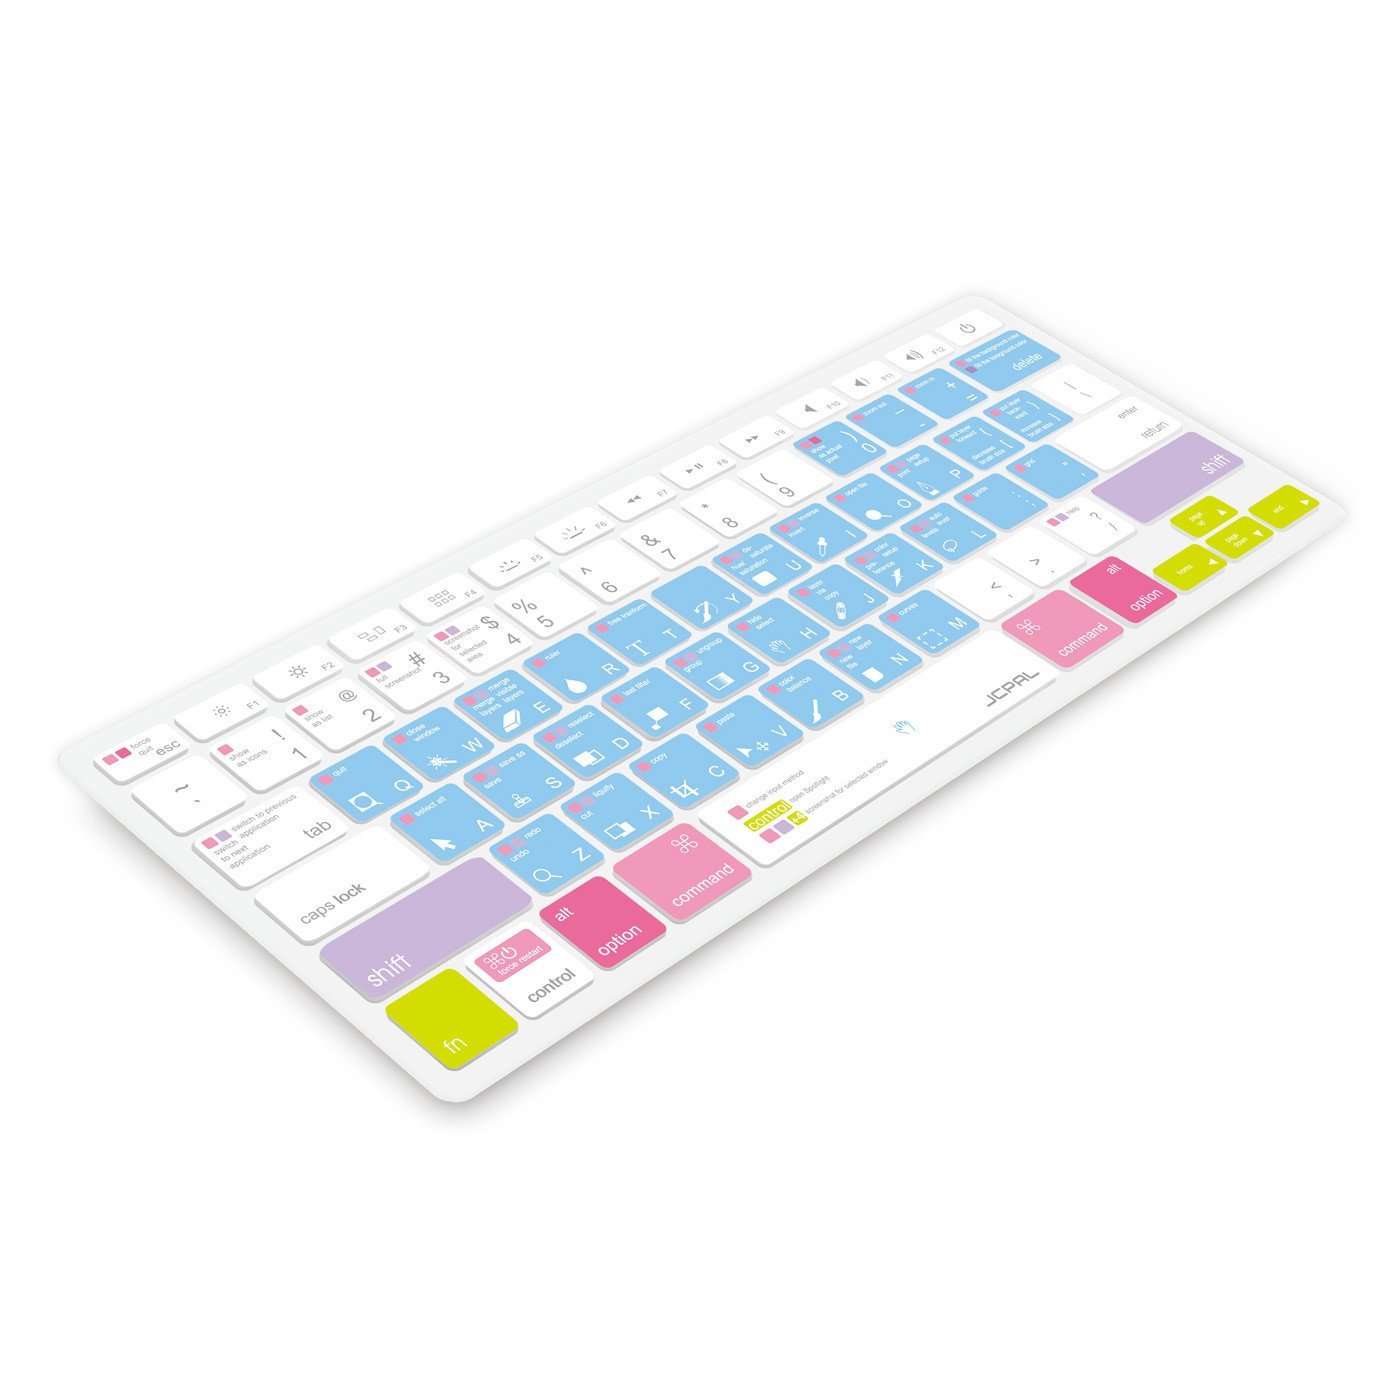 JCPal Unavailable VerSkin Photoshop Shortcut Keyboard Protector (US-Layout)